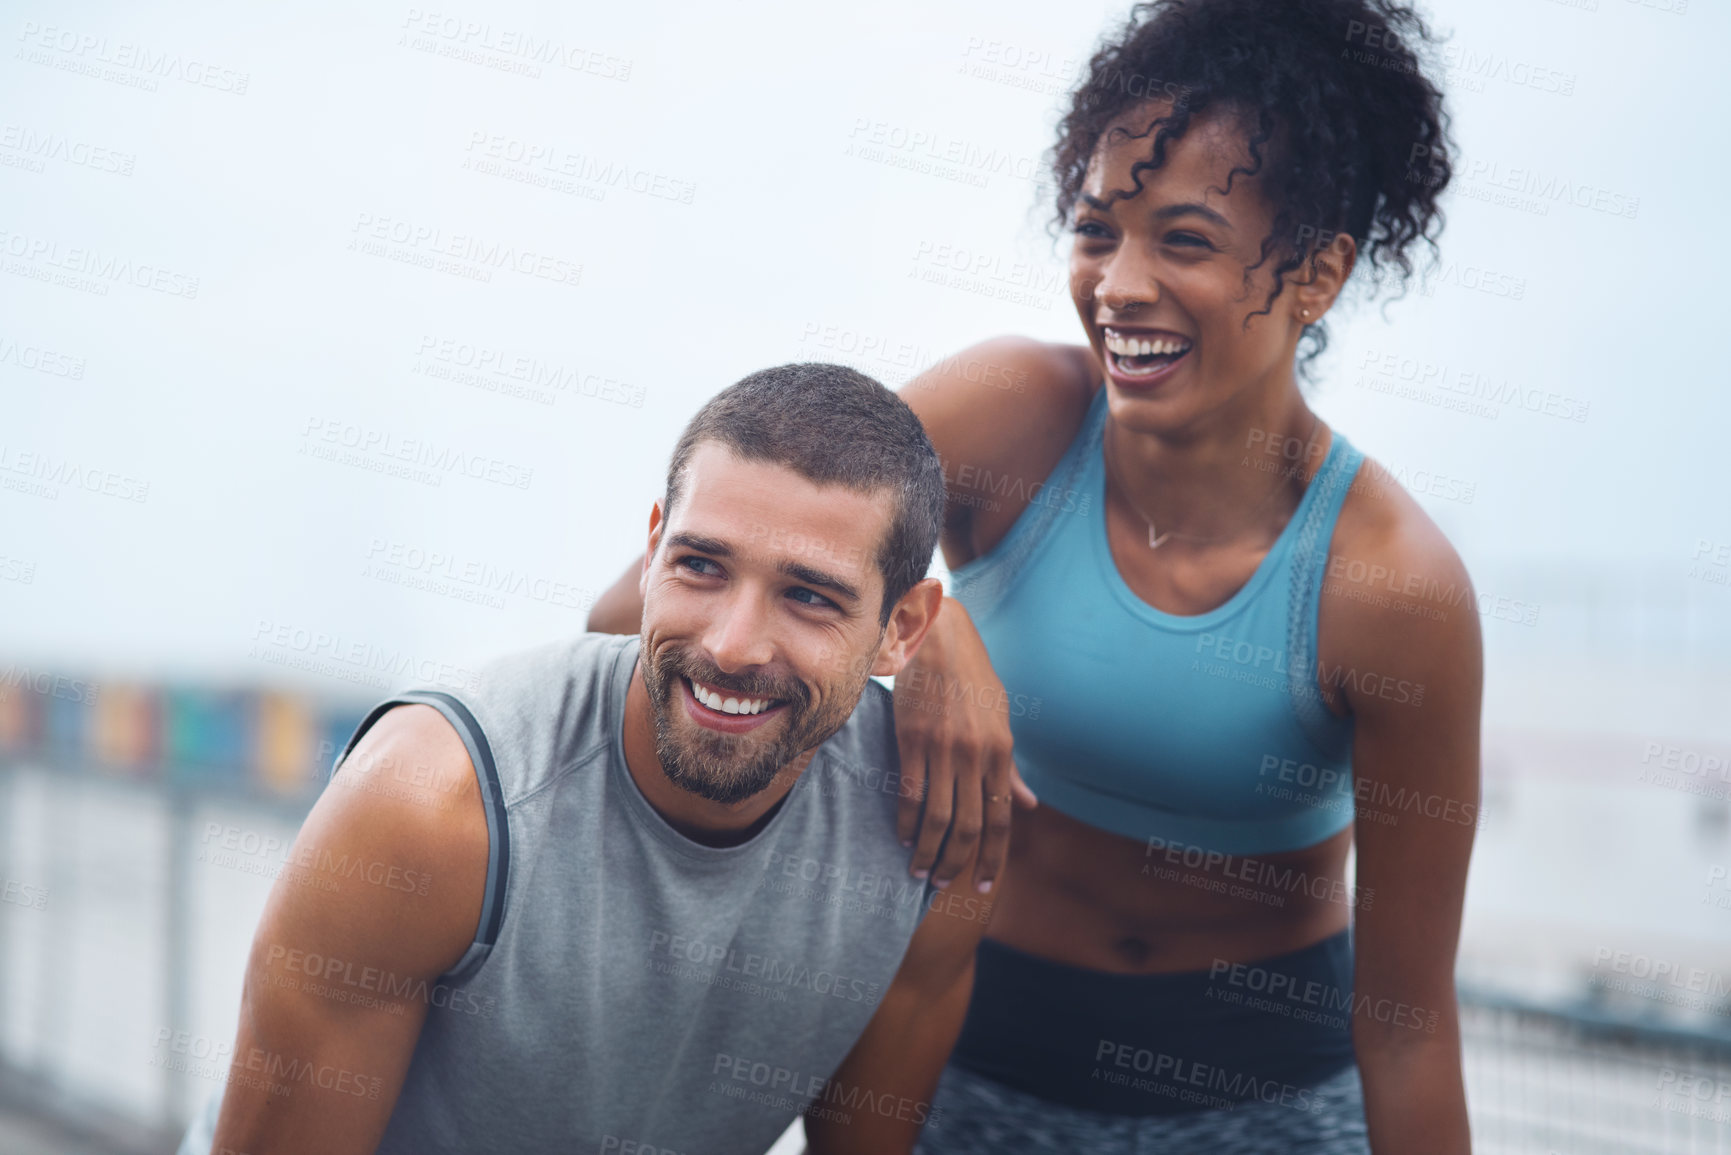 Buy stock photo Shot of a sporty young couple taking a break while exercising outdoors